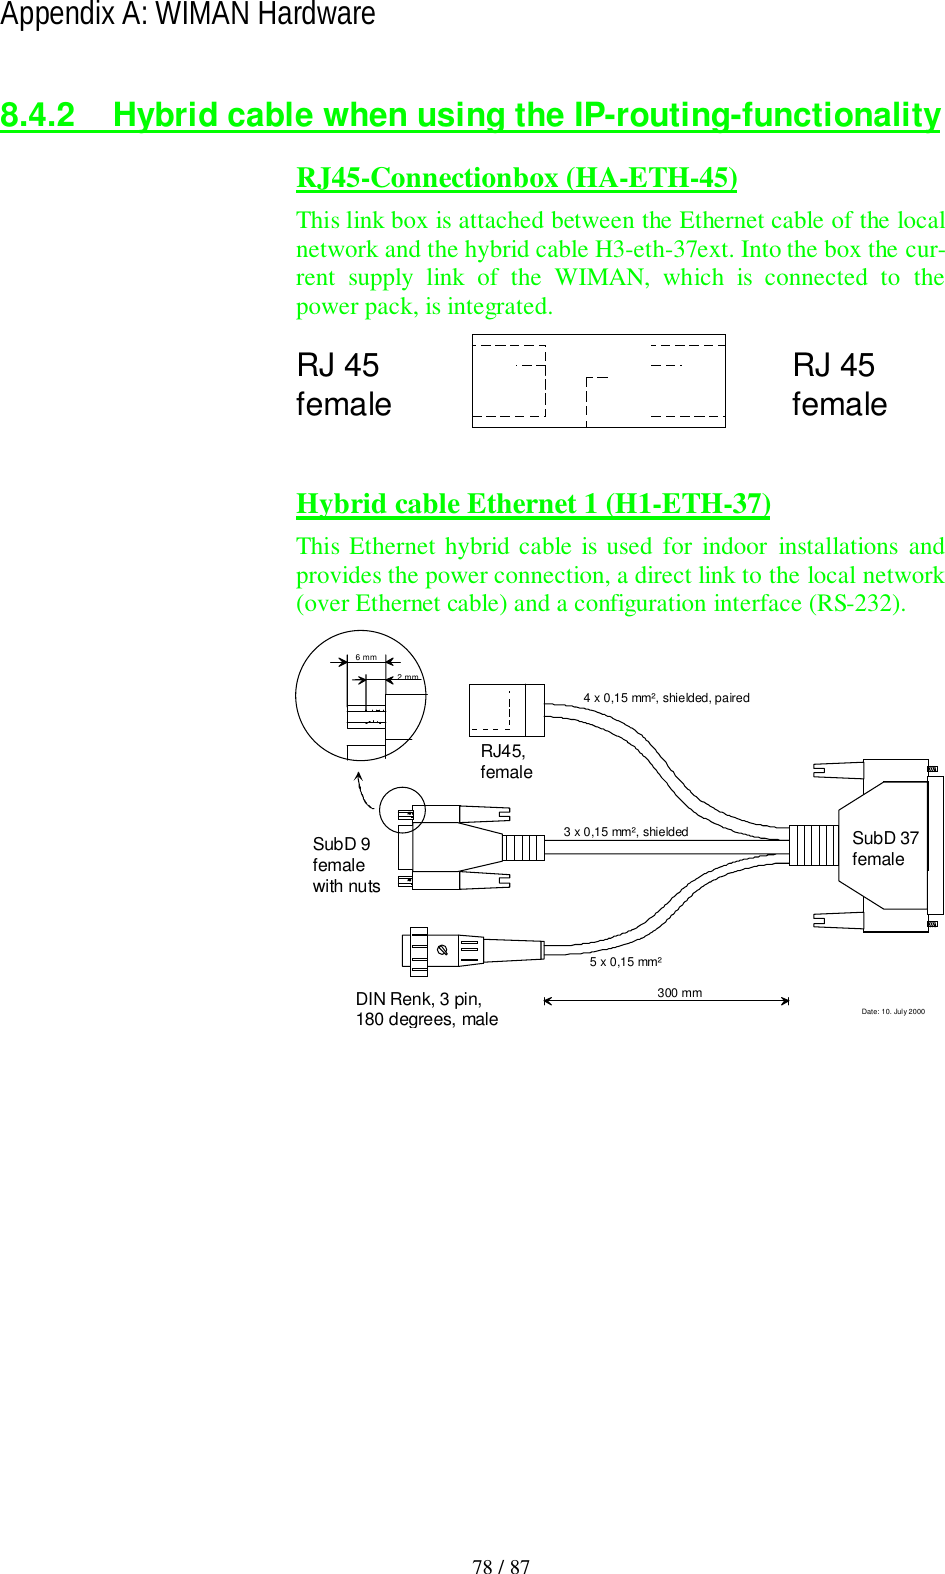 78 / 87Appendix A: WIMAN Hardware8.4.2  Hybrid cable when using the IP-routing-functionalityRJ45-Connectionbox (HA-ETH-45)This link box is attached between the Ethernet cable of the localnetwork and the hybrid cable H3-eth-37ext. Into the box the cur-rent supply link of the WIMAN, which is connected to thepower pack, is integrated.RJ 45female RJ 45femaleHybrid cable Ethernet 1 (H1-ETH-37)This Ethernet hybrid cable is used for indoor installations andprovides the power connection, a direct link to the local network(over Ethernet cable) and a configuration interface (RS-232).SubD 37female4 x 0,15 mm², shielded, paired3 x 0,15 mm², shielded5 x 0,15 mm²300 mmDIN Renk, 3 pin,180 degrees, male Date: 10. July 2000SubD 9femalewith nutsRJ45,female2 mm6 mm